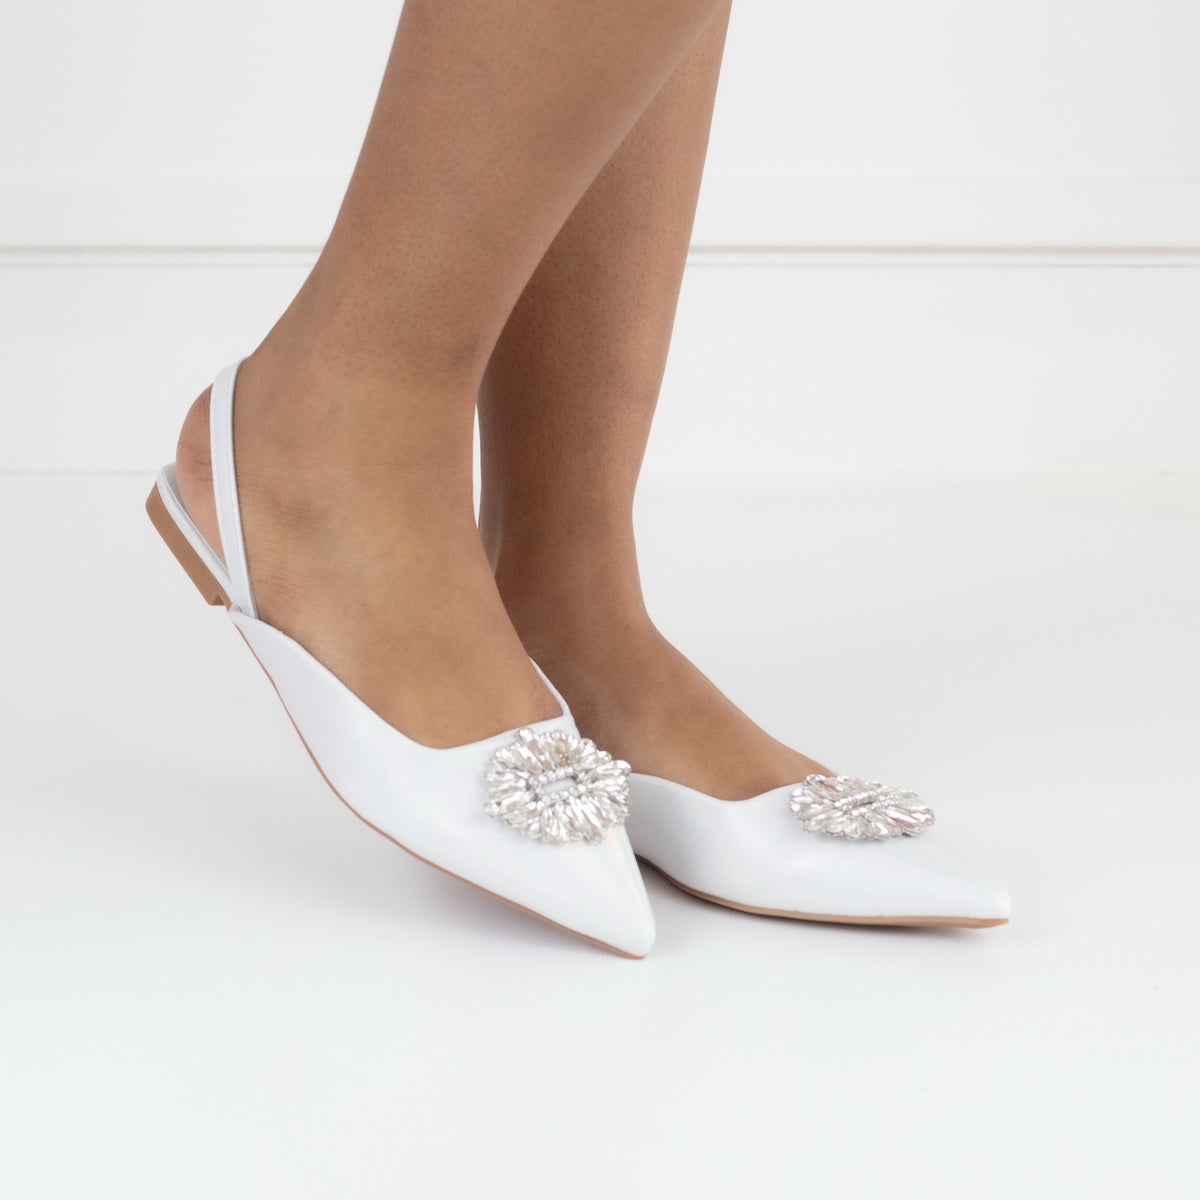 White pointy sling back pump with a trim erina